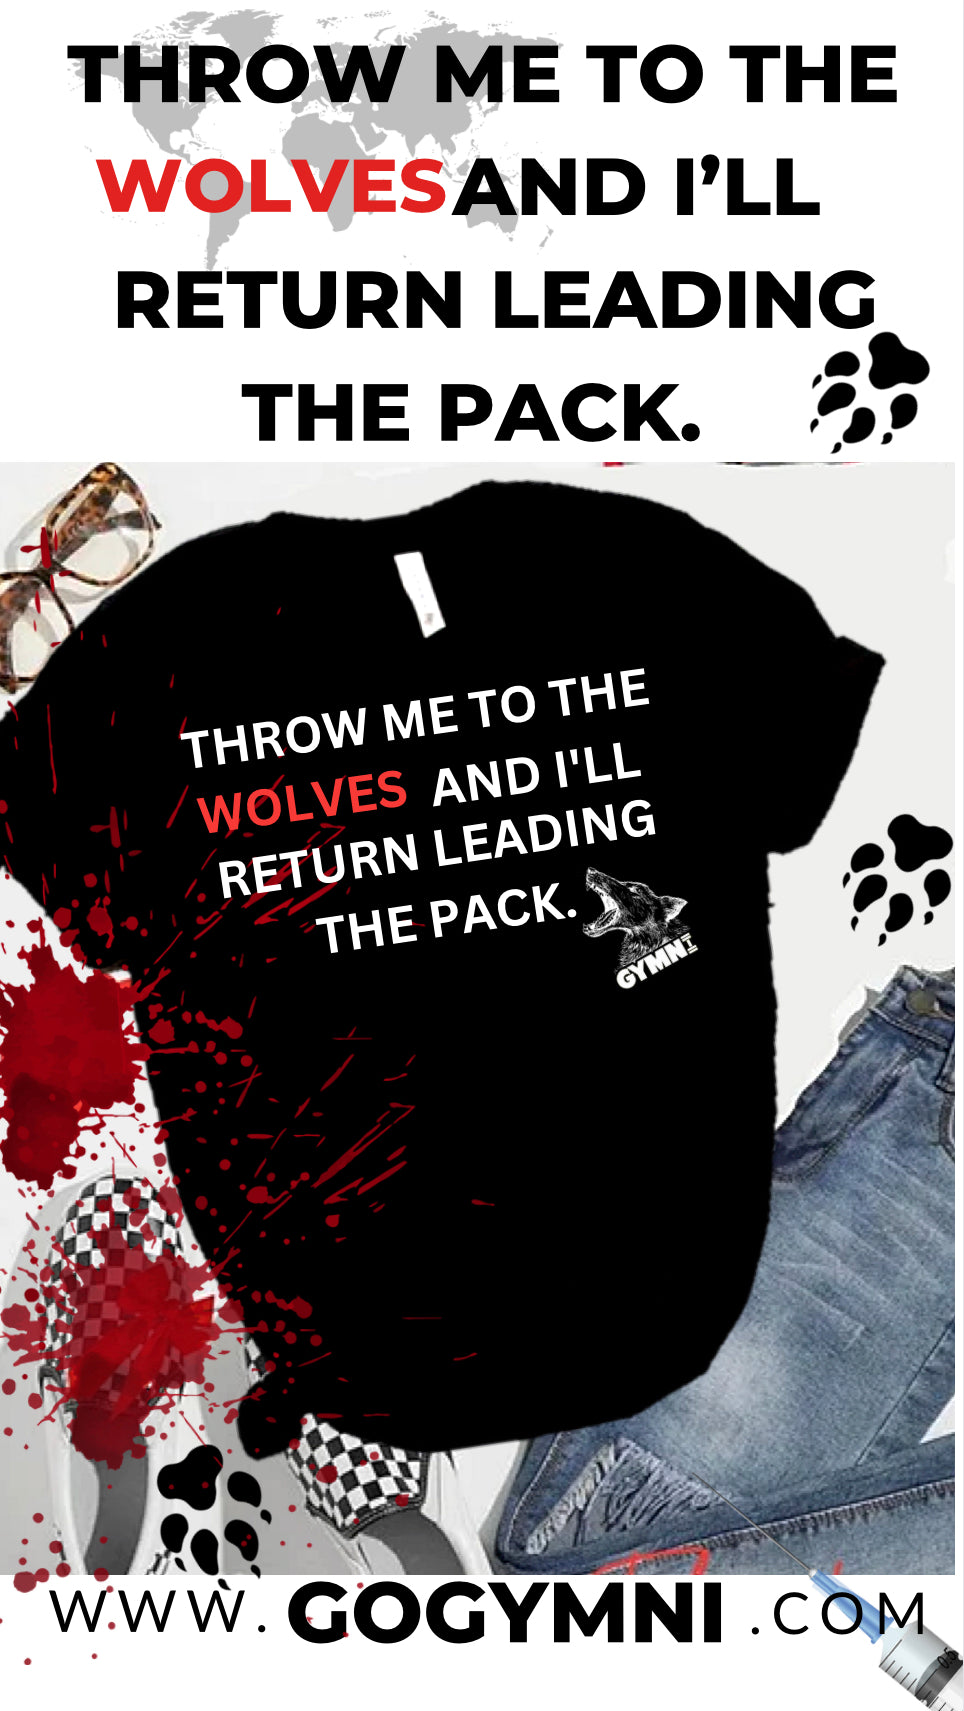 THROW ME TO THE WOLVES AND I'LL RETURN LEADING THE PACK shirt